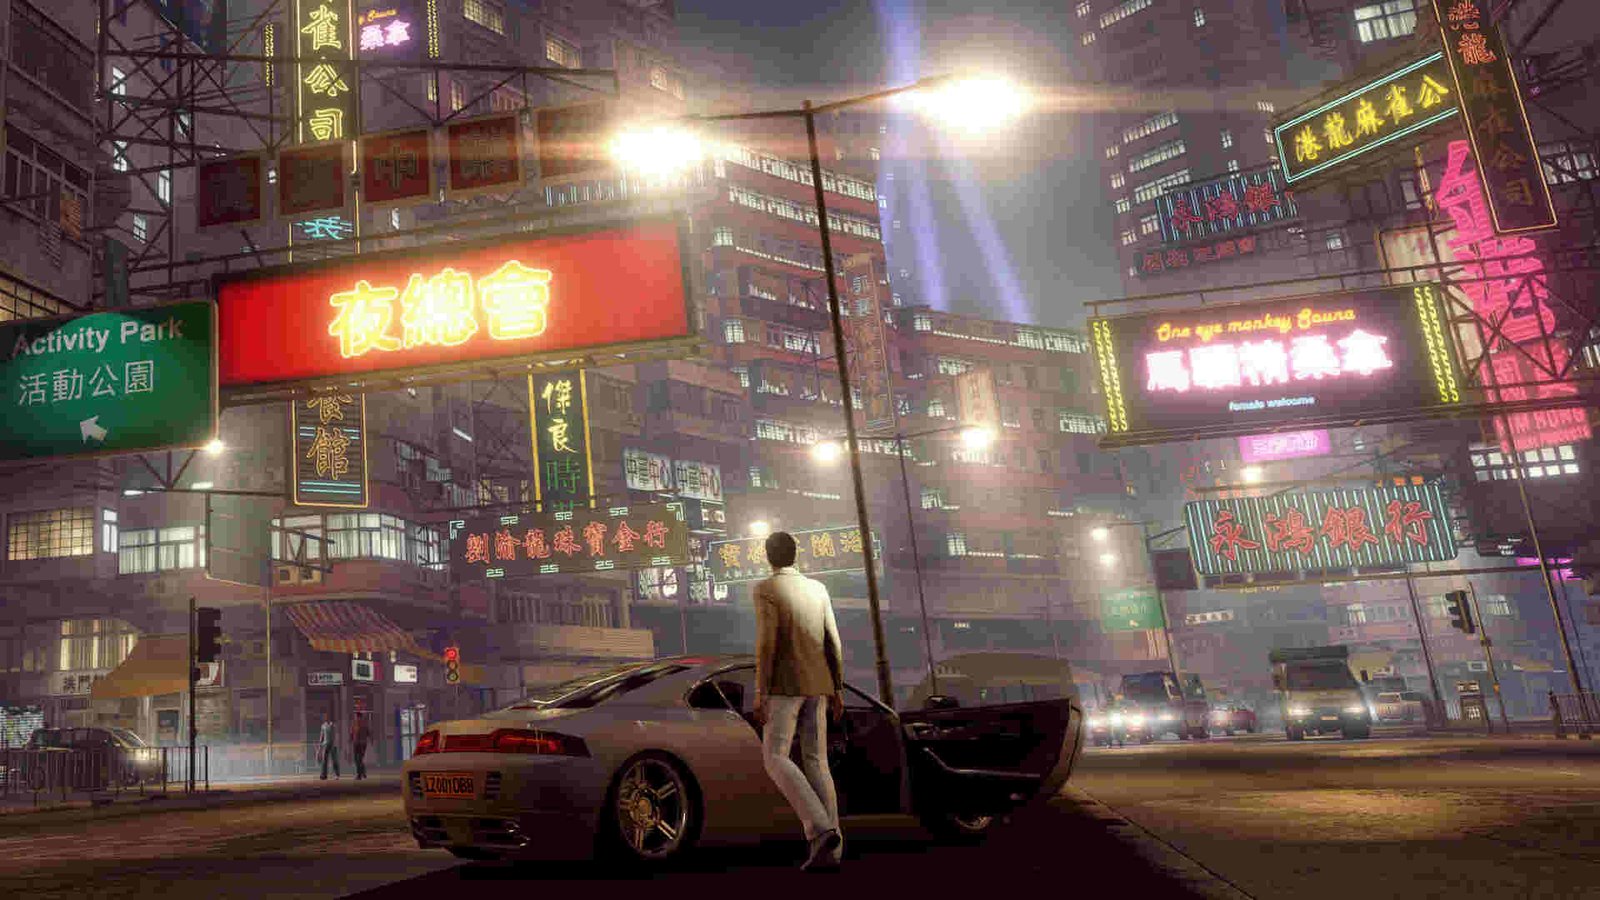 Sleeping Dogs 2 Release Date: When it will be available